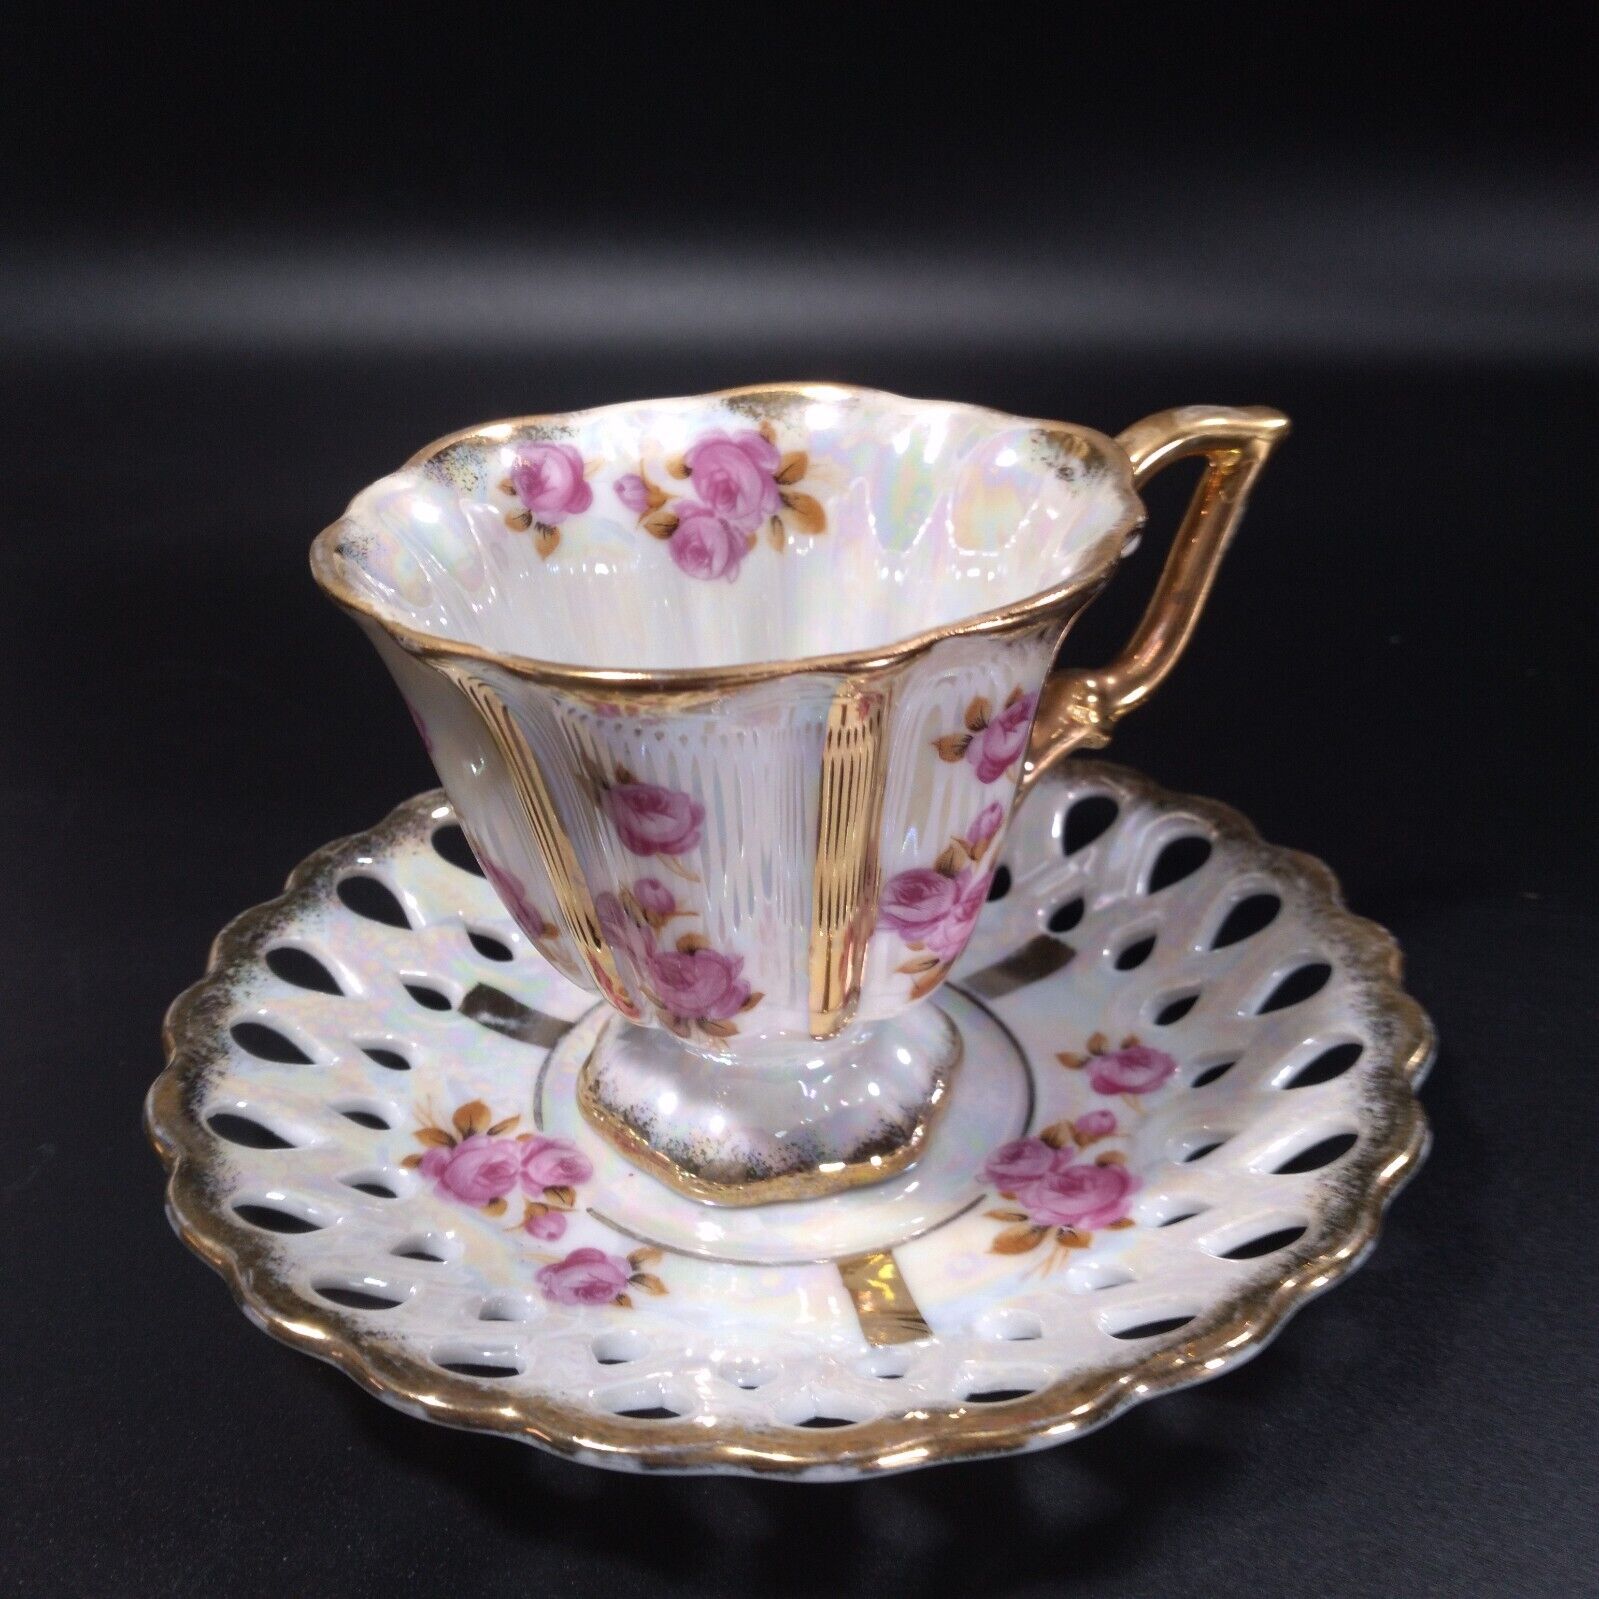 Royal Sealy Bone China Footed Cup Pierced Saucer Iridescent Pink Roses Gold Trim